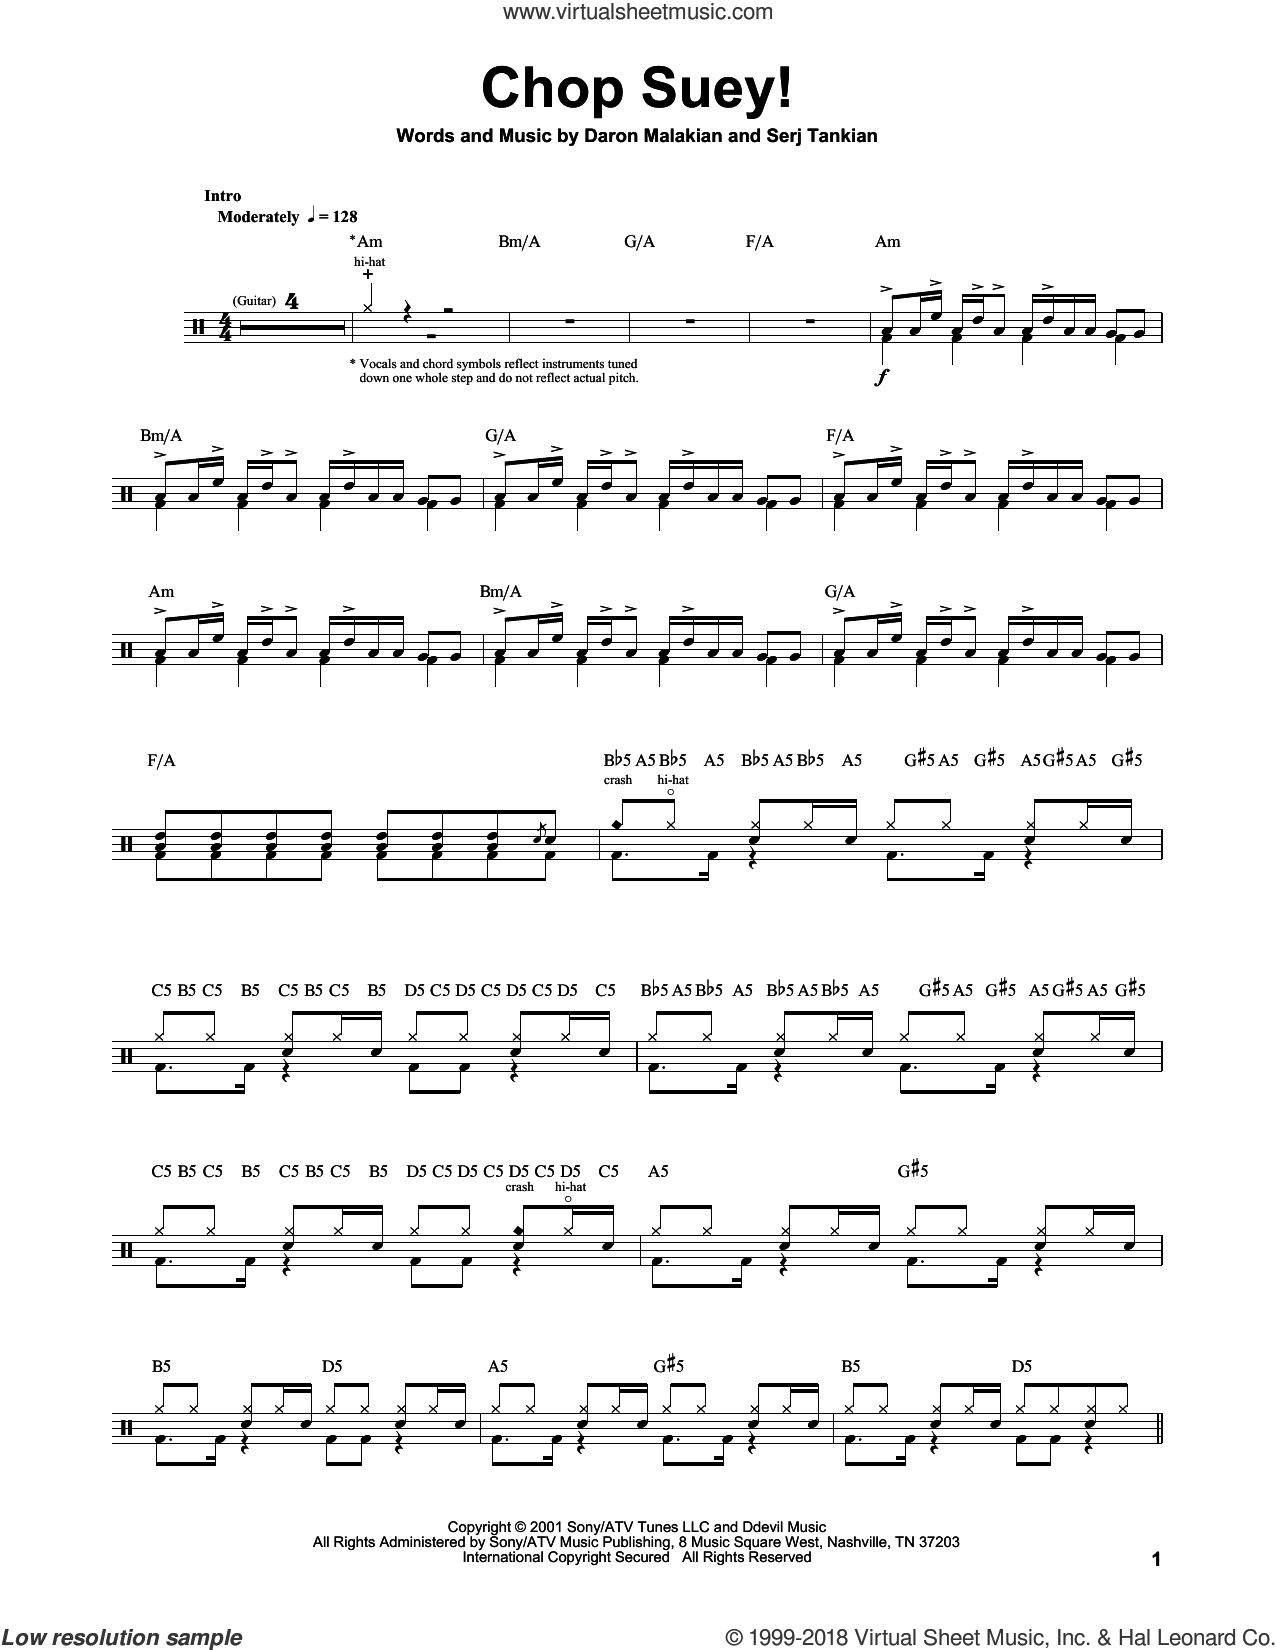 Toxicity - System of a Down Sheet music for Piano (Solo